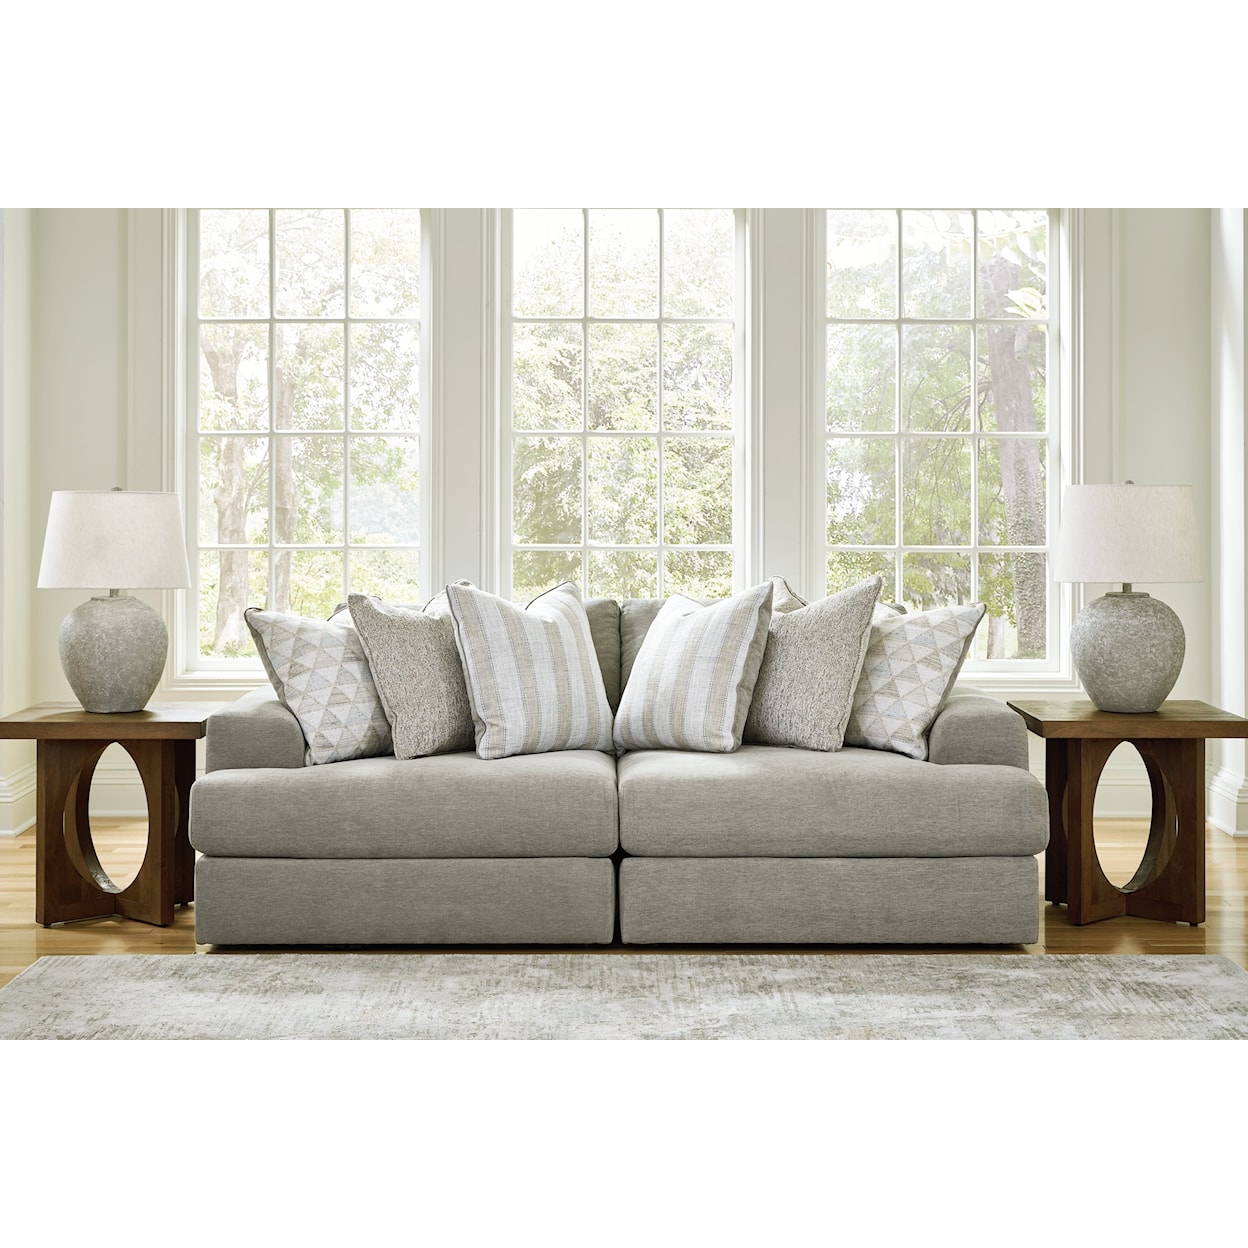 Benchcraft Avaliyah 2-Piece Sectional